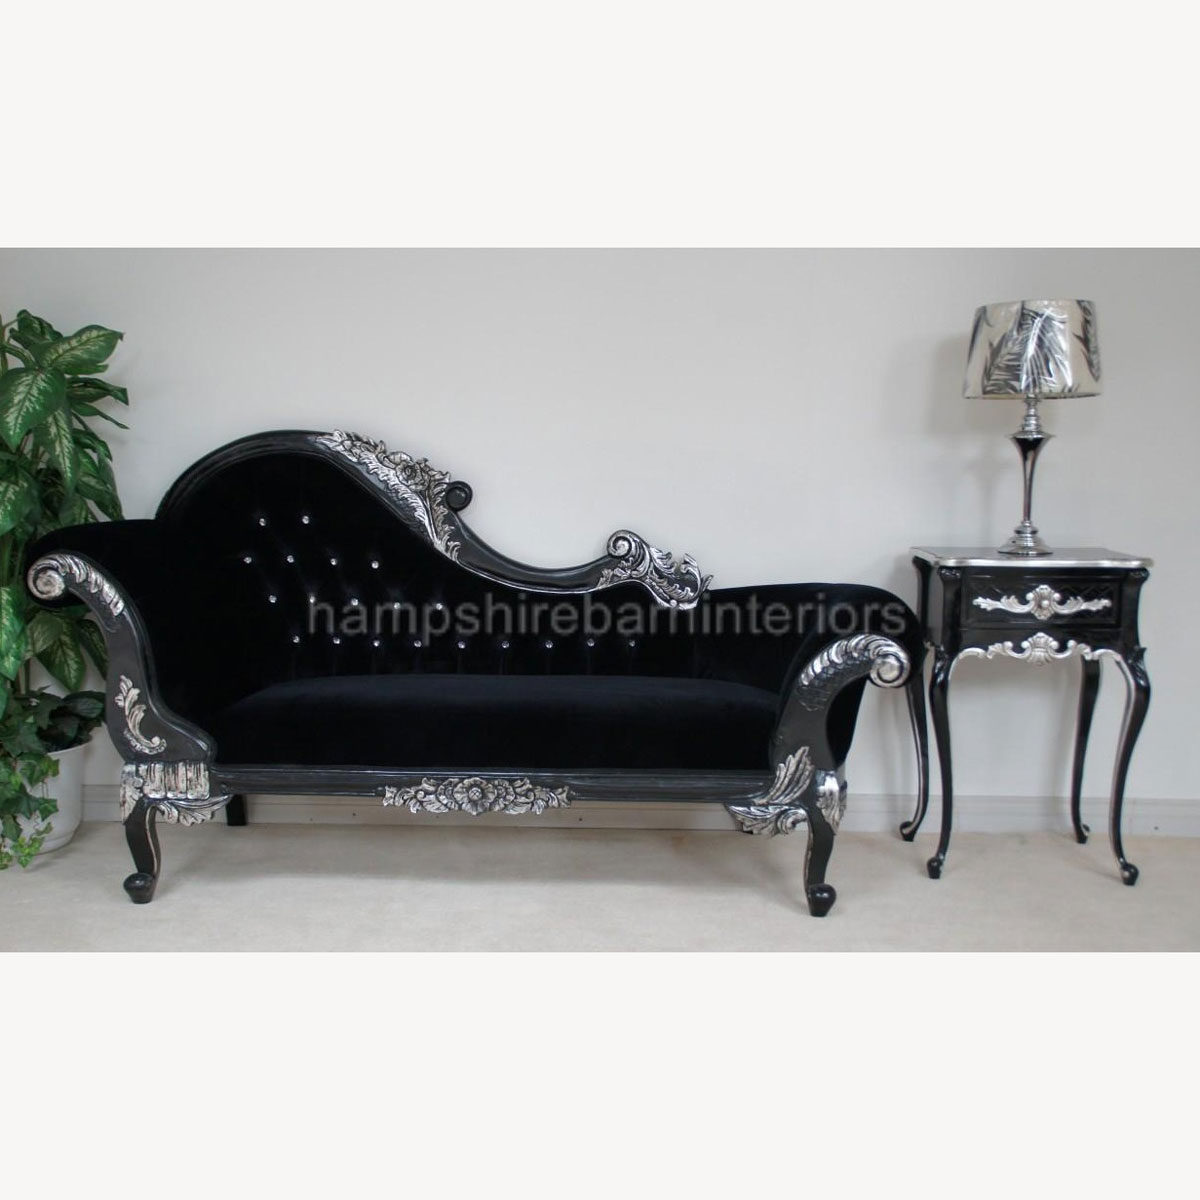 Black Diamond Silvered Red Hampshire Medium Chaise …with Crystal Buttons And Black Velvet - Hampshire Barn Interiors - Home - Hampshire Barn Interiors News